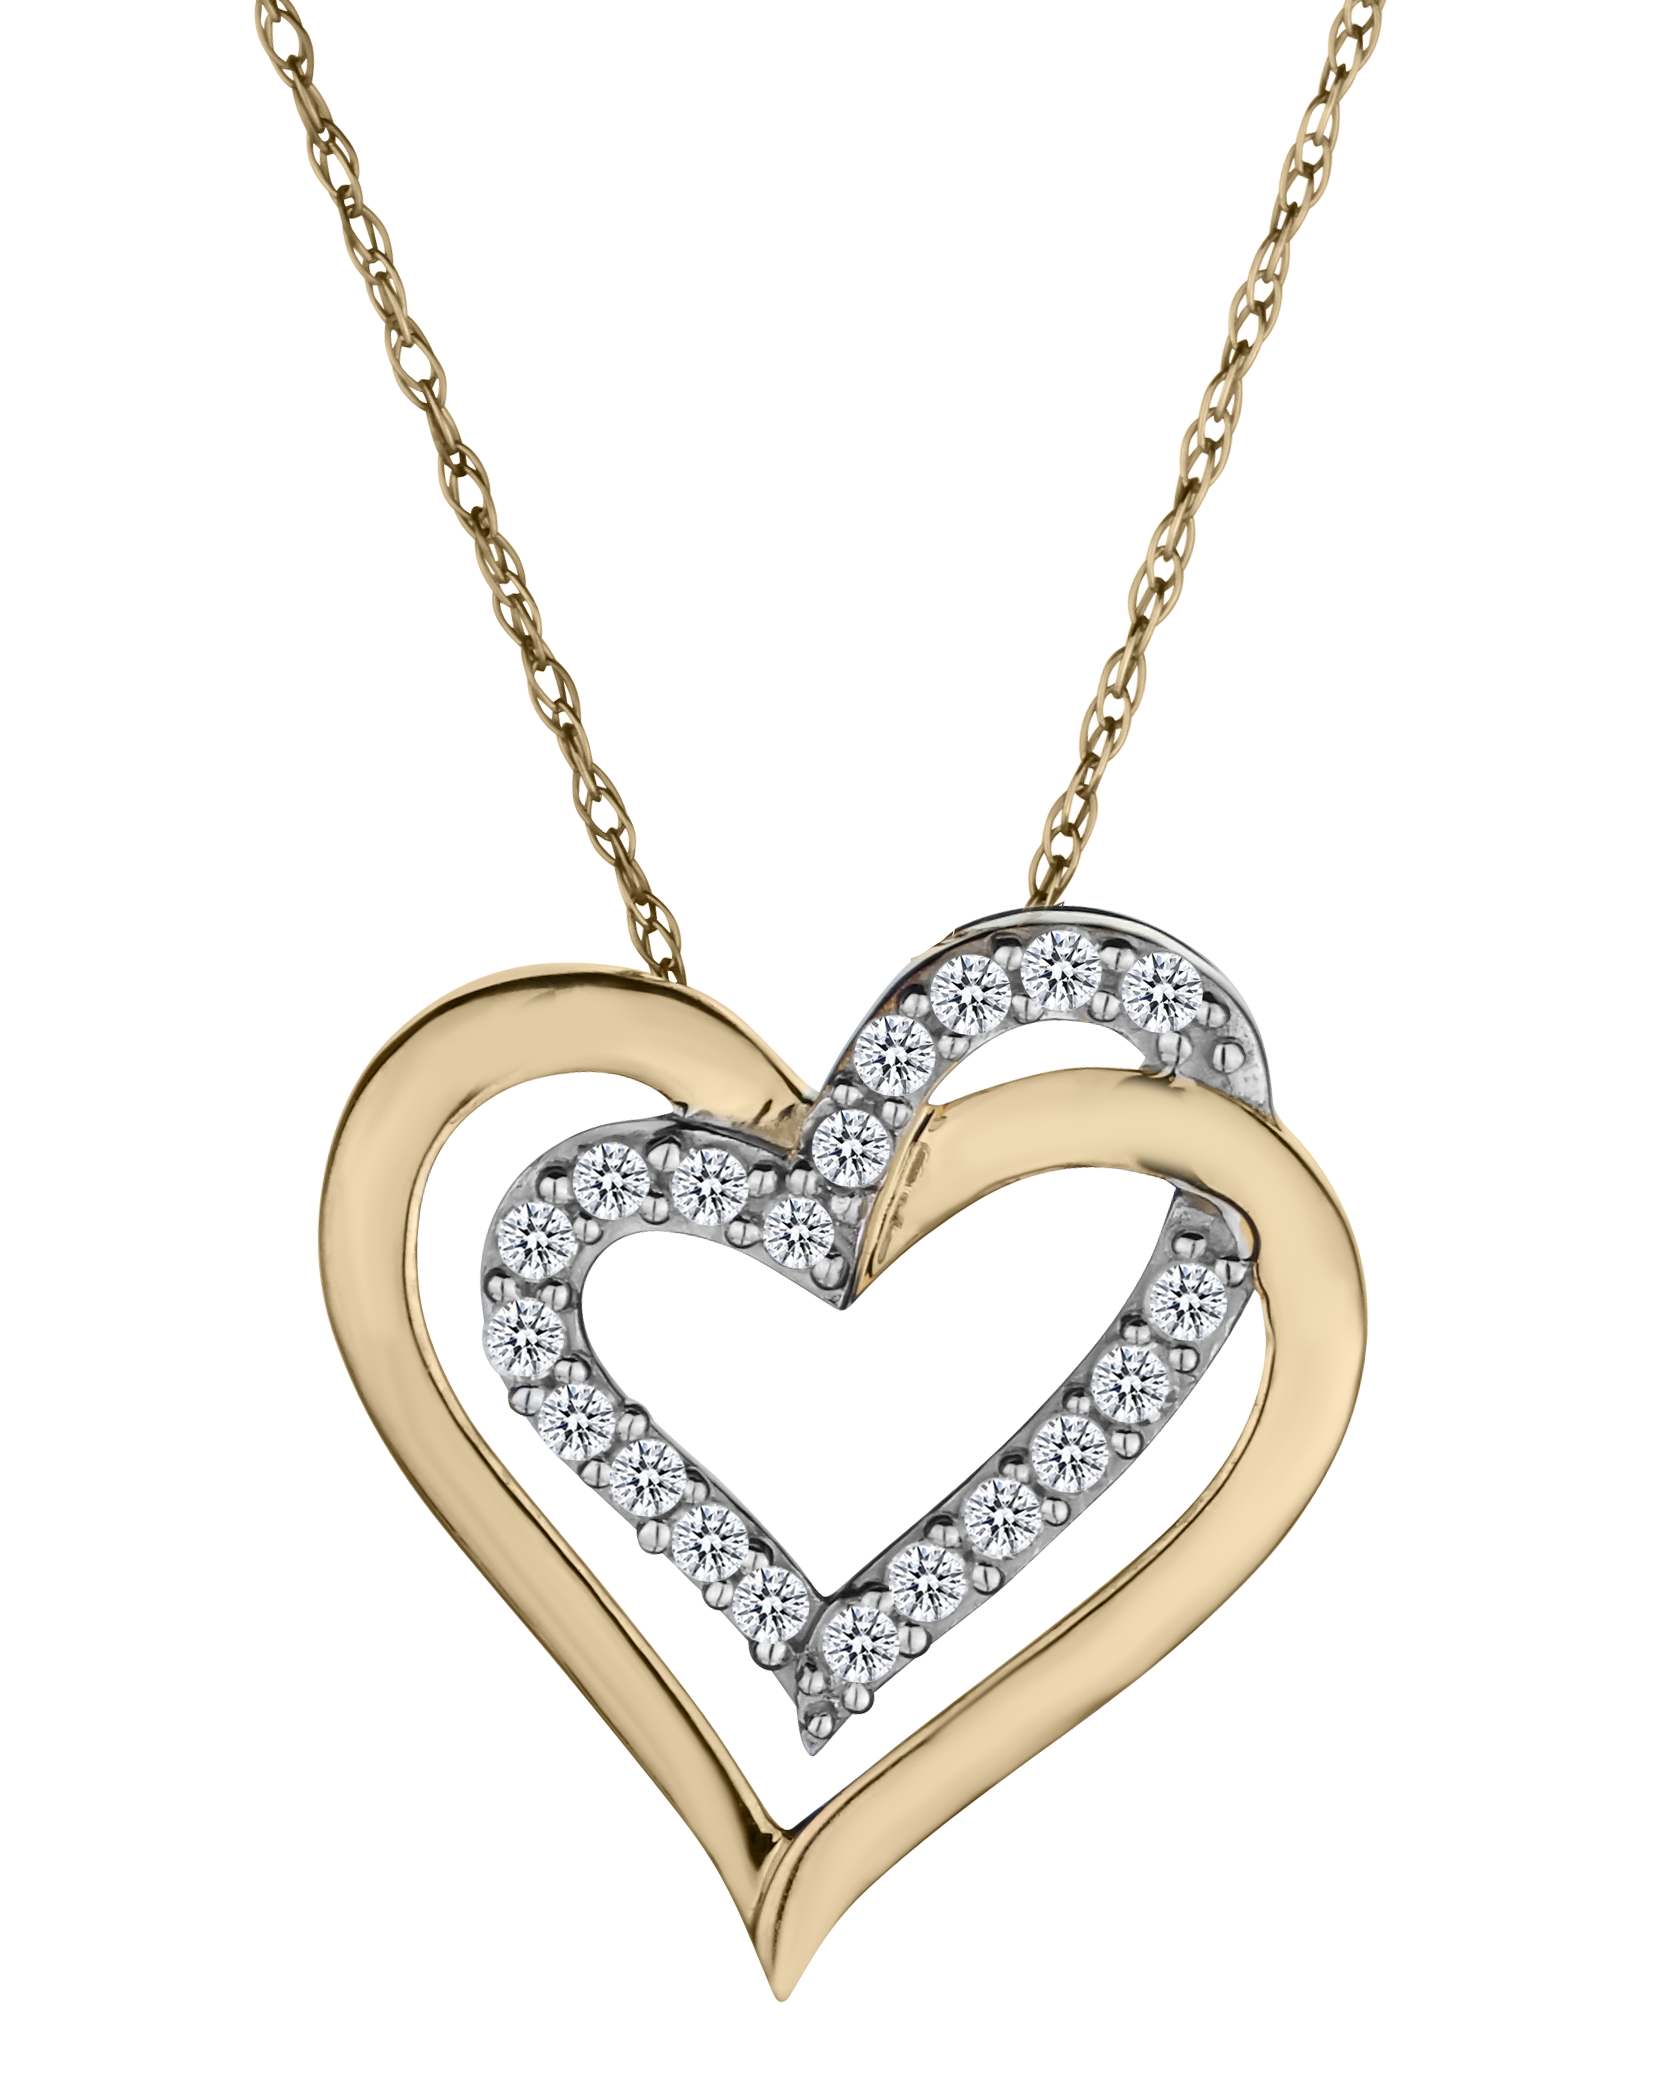 .25 Carat Double Heart Diamond Pendant, 10kt Yellow Gold. Necklaces and Pendants. Griffin Jewellery Designs.